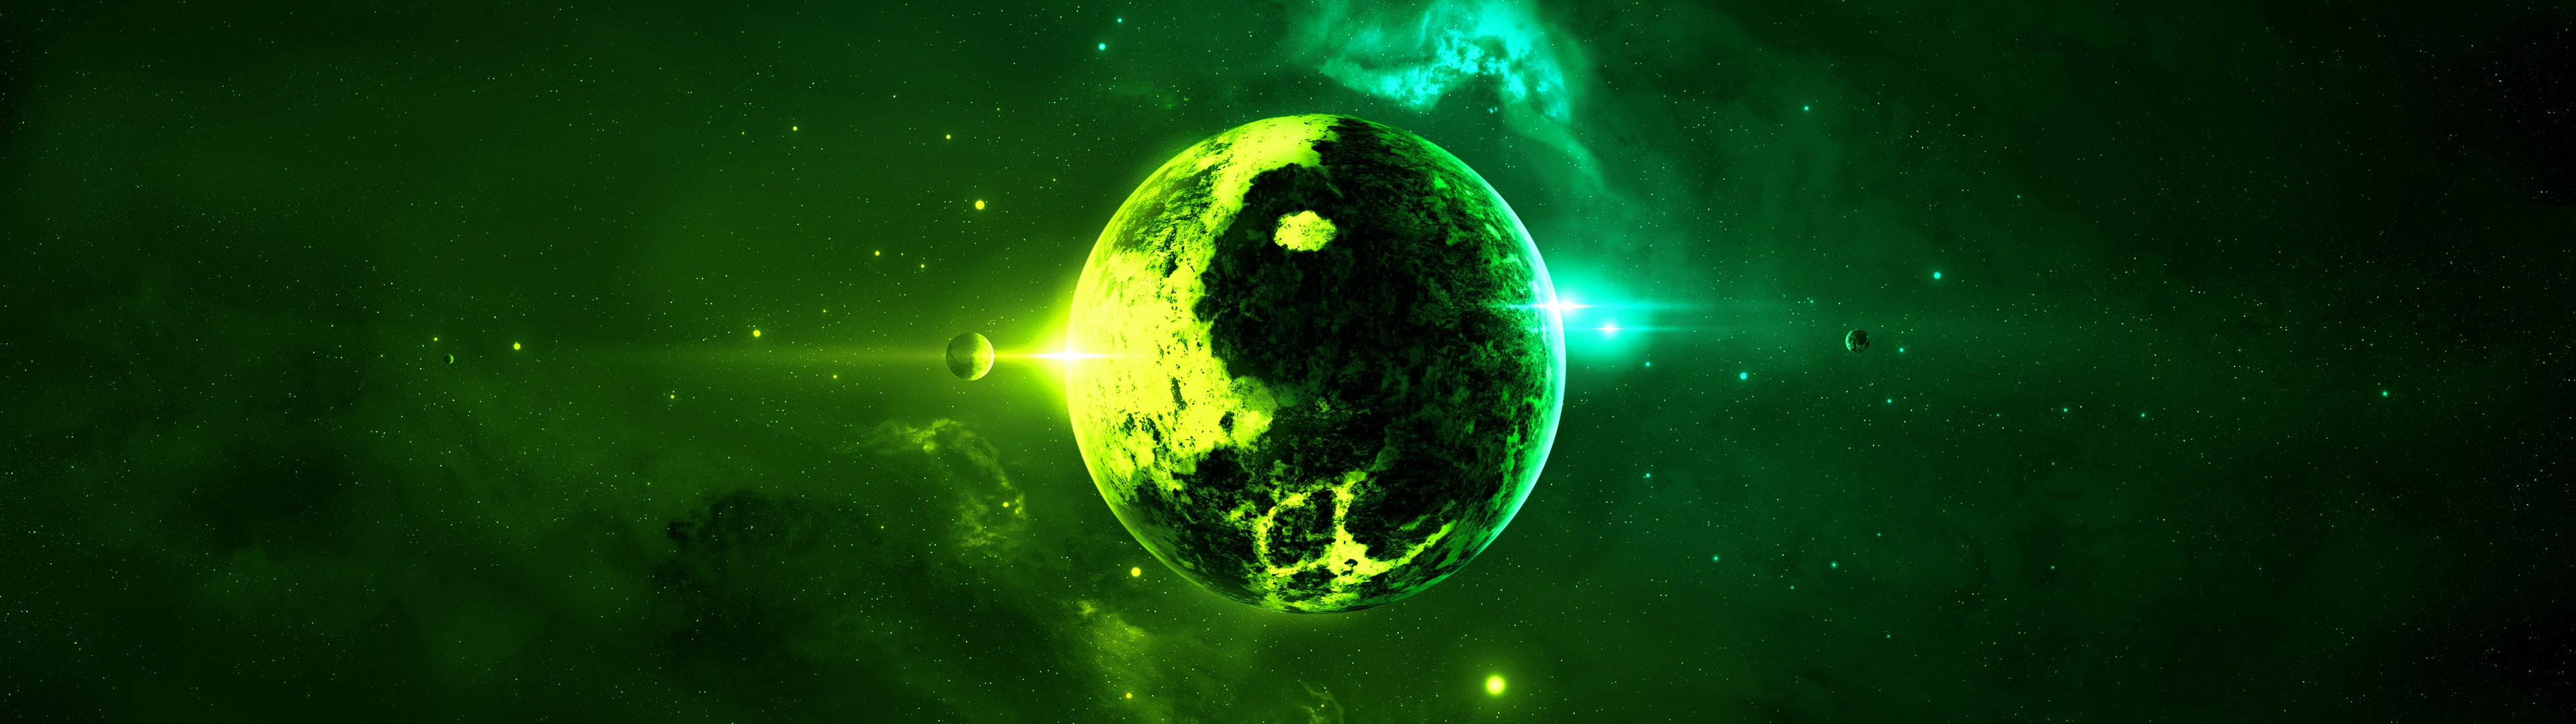 double planet green Wallpapers HD